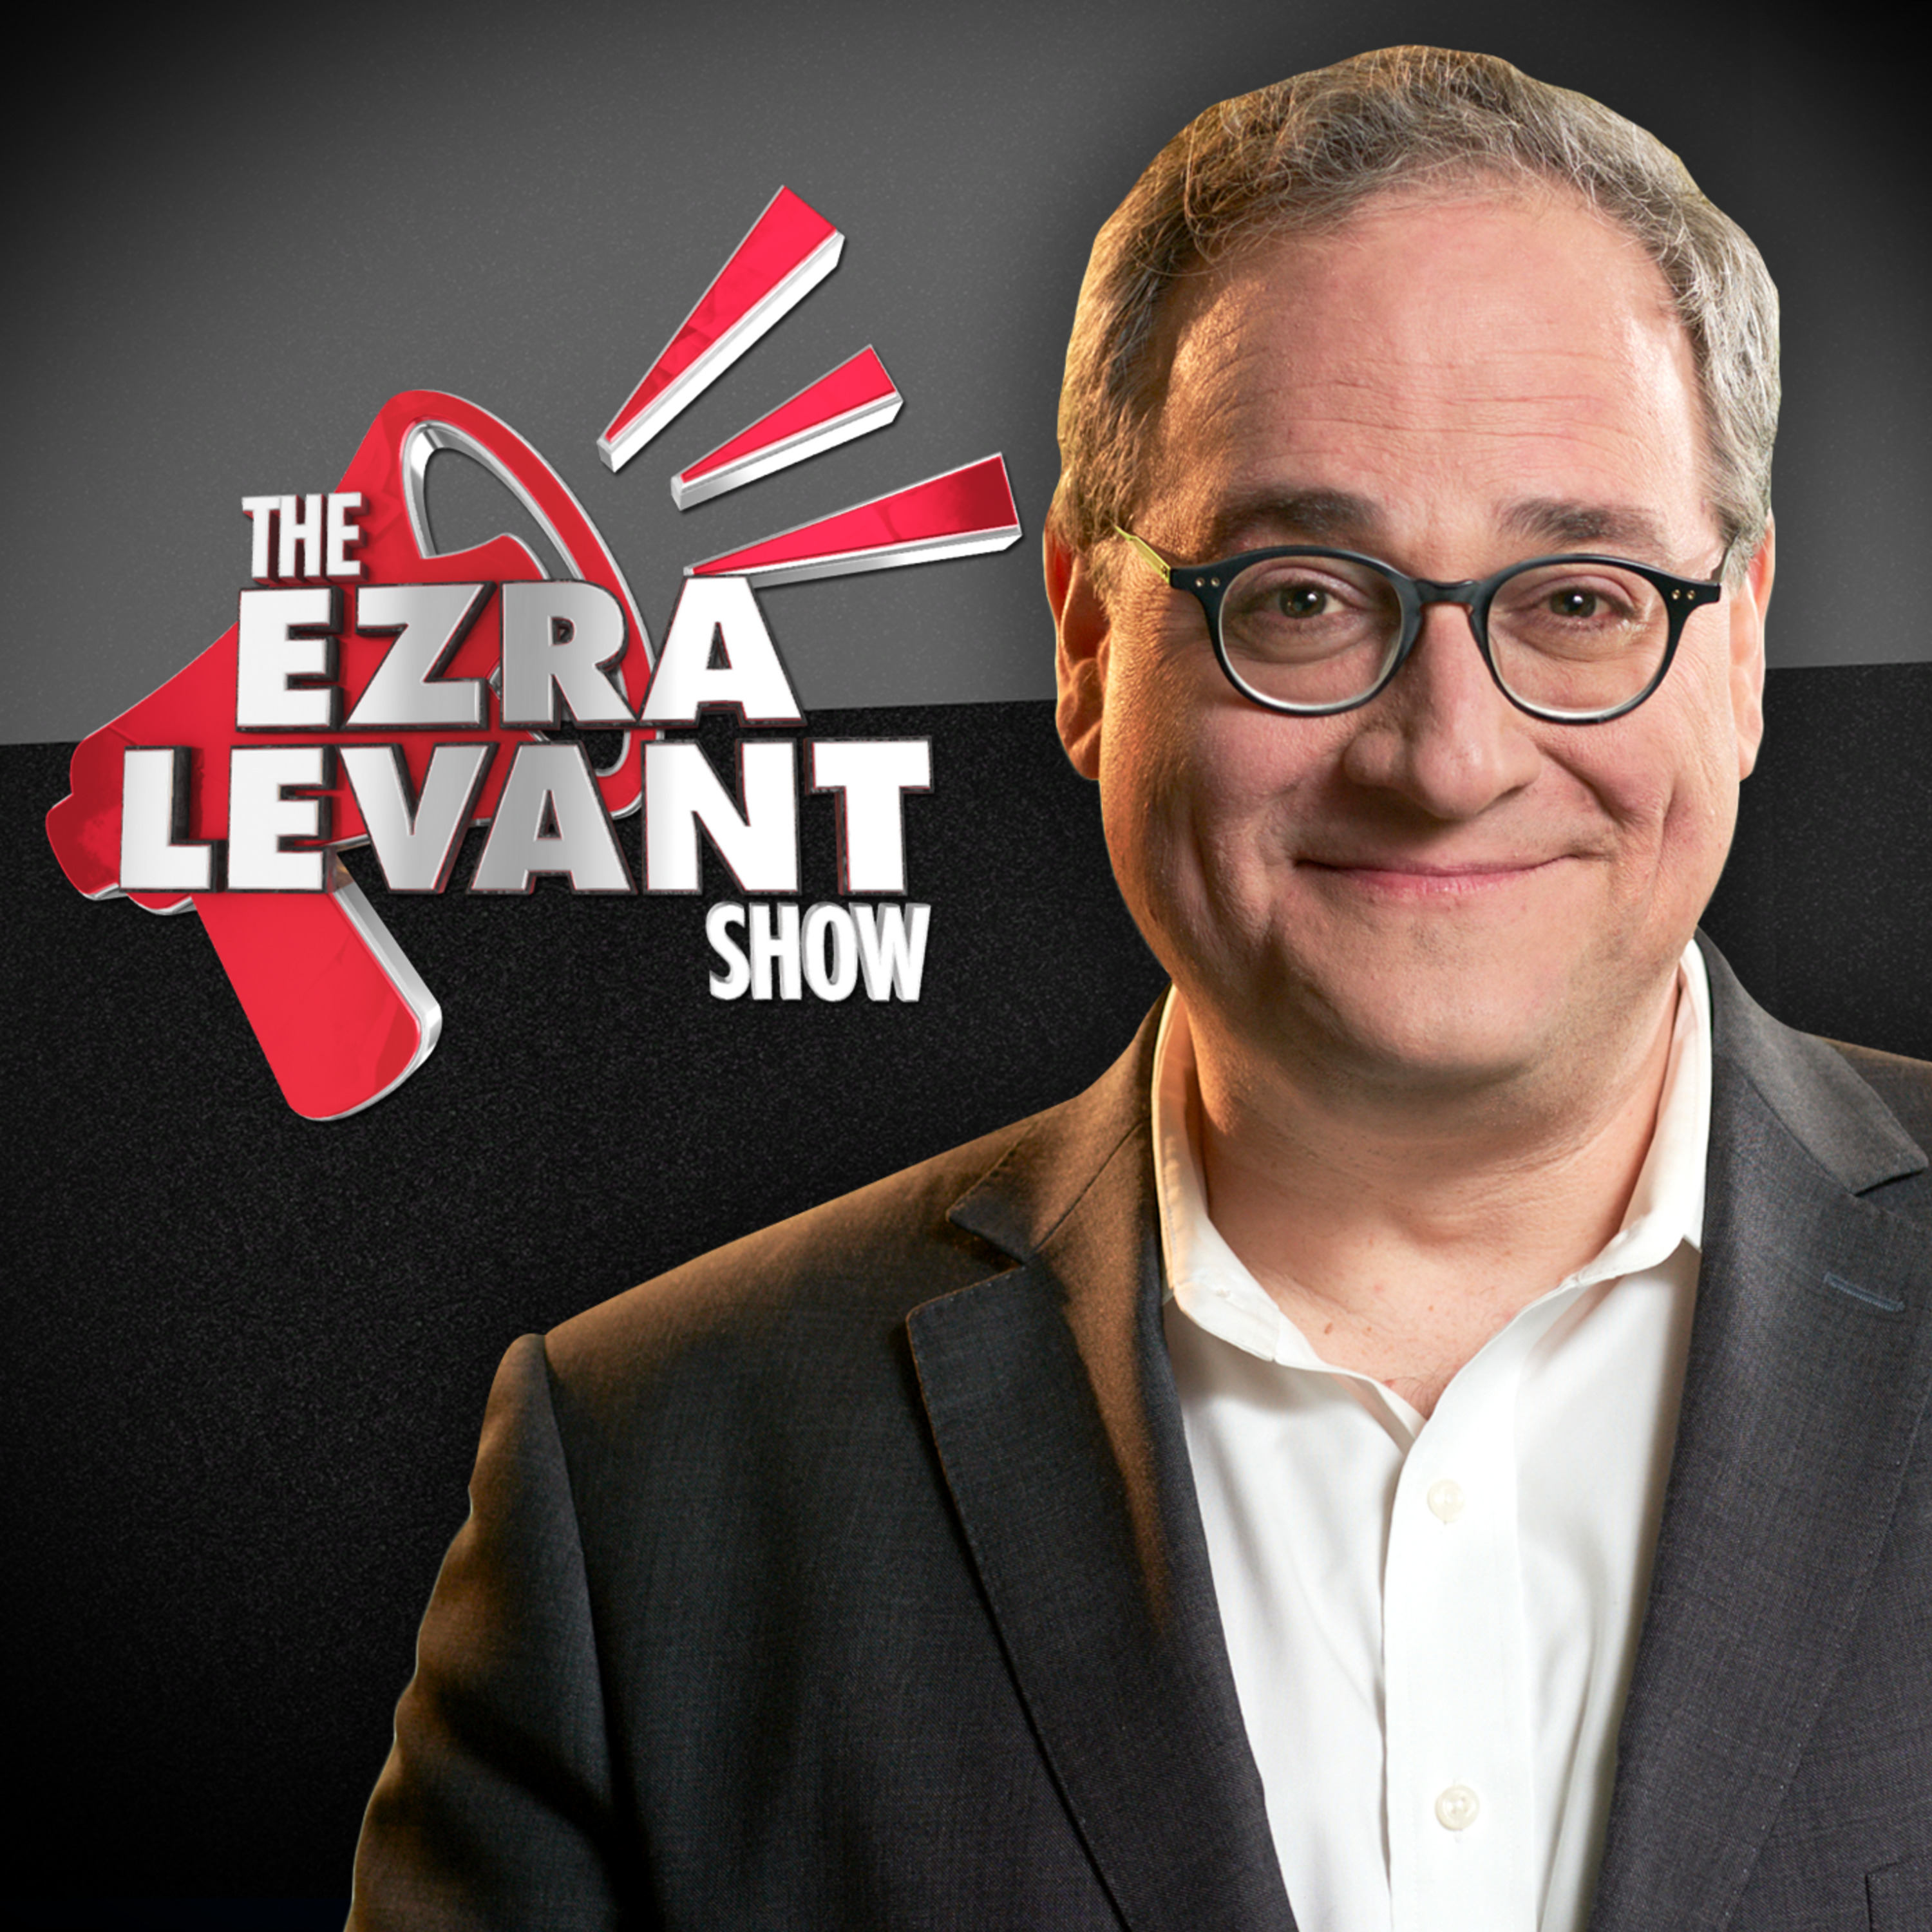 EZRA LEVANT | One of Canada's richest monopolies begs for more taxpayer bailouts